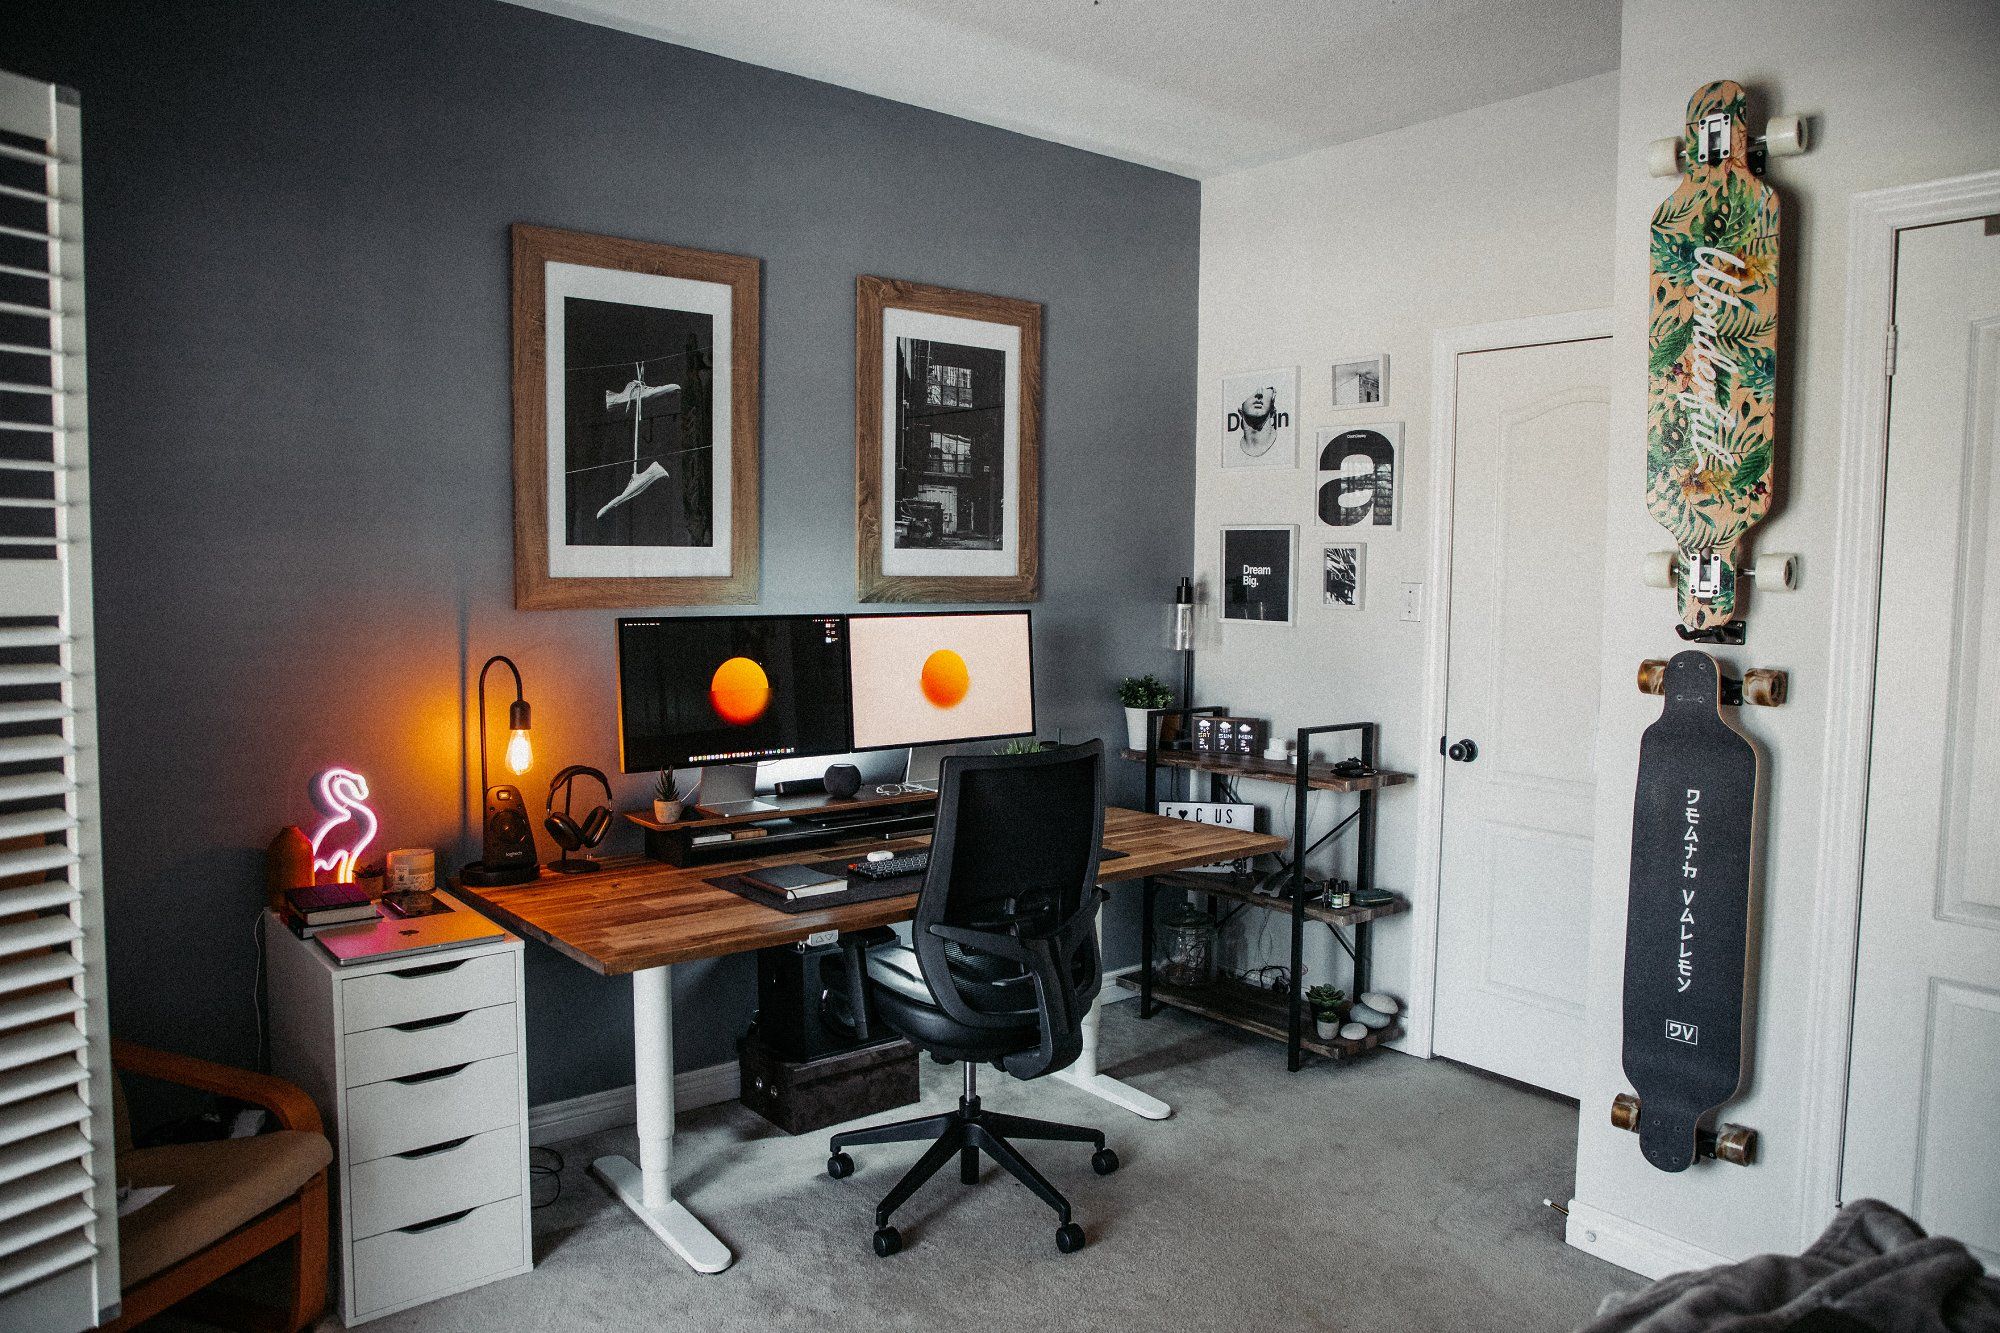 A standing desk setup featuring two Apple Studio Displays, a mechanical keyboard, a Lacasse office chair, and an ALEX drawer, along with several framed art posters and skateboards hanging on the walls